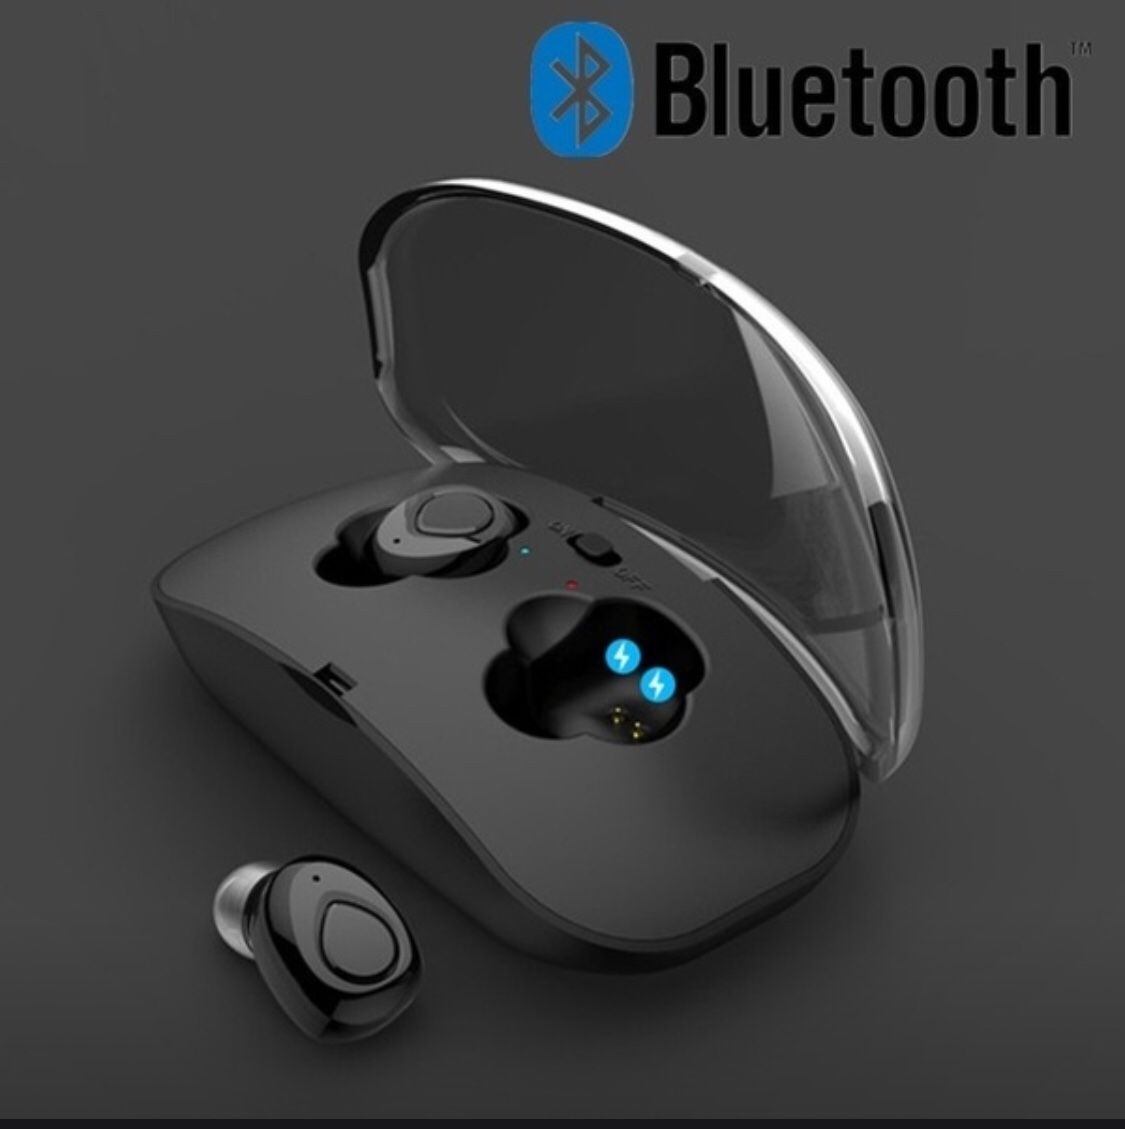 New Bluetooth Earbuds